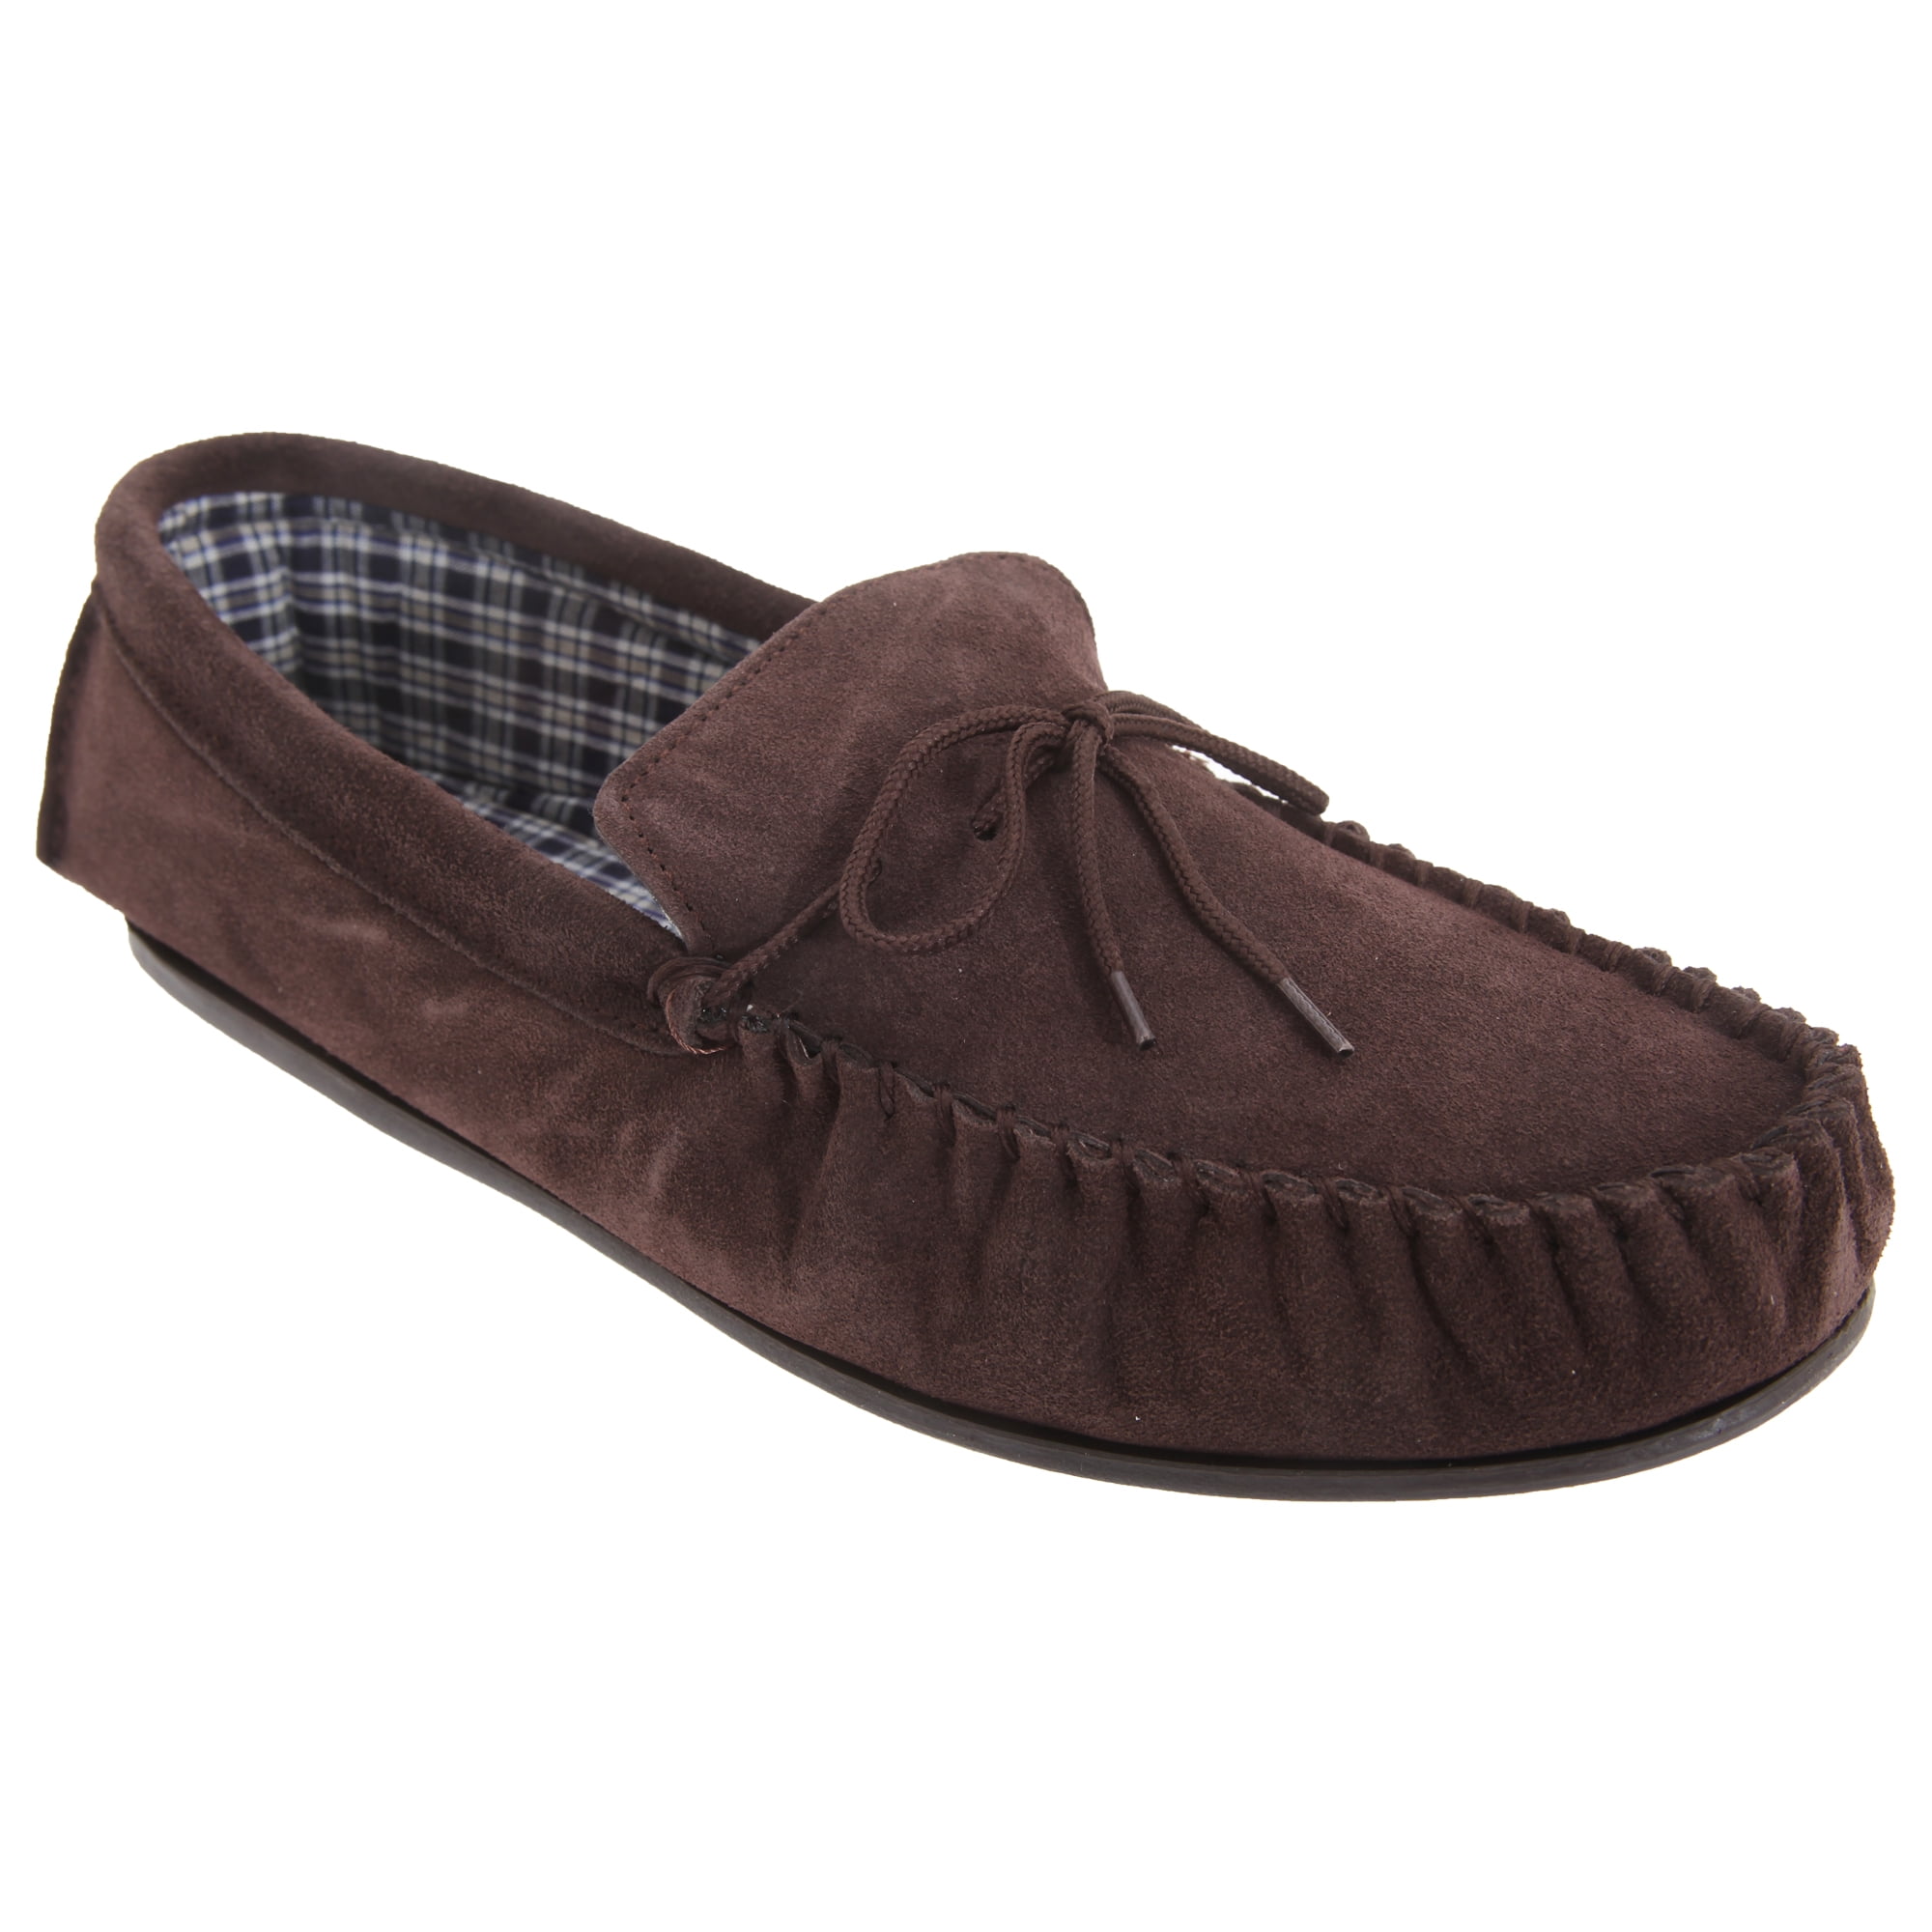 SlumberzzZ Boys Plaid Check Fleece Lined Moccasin Slippers 